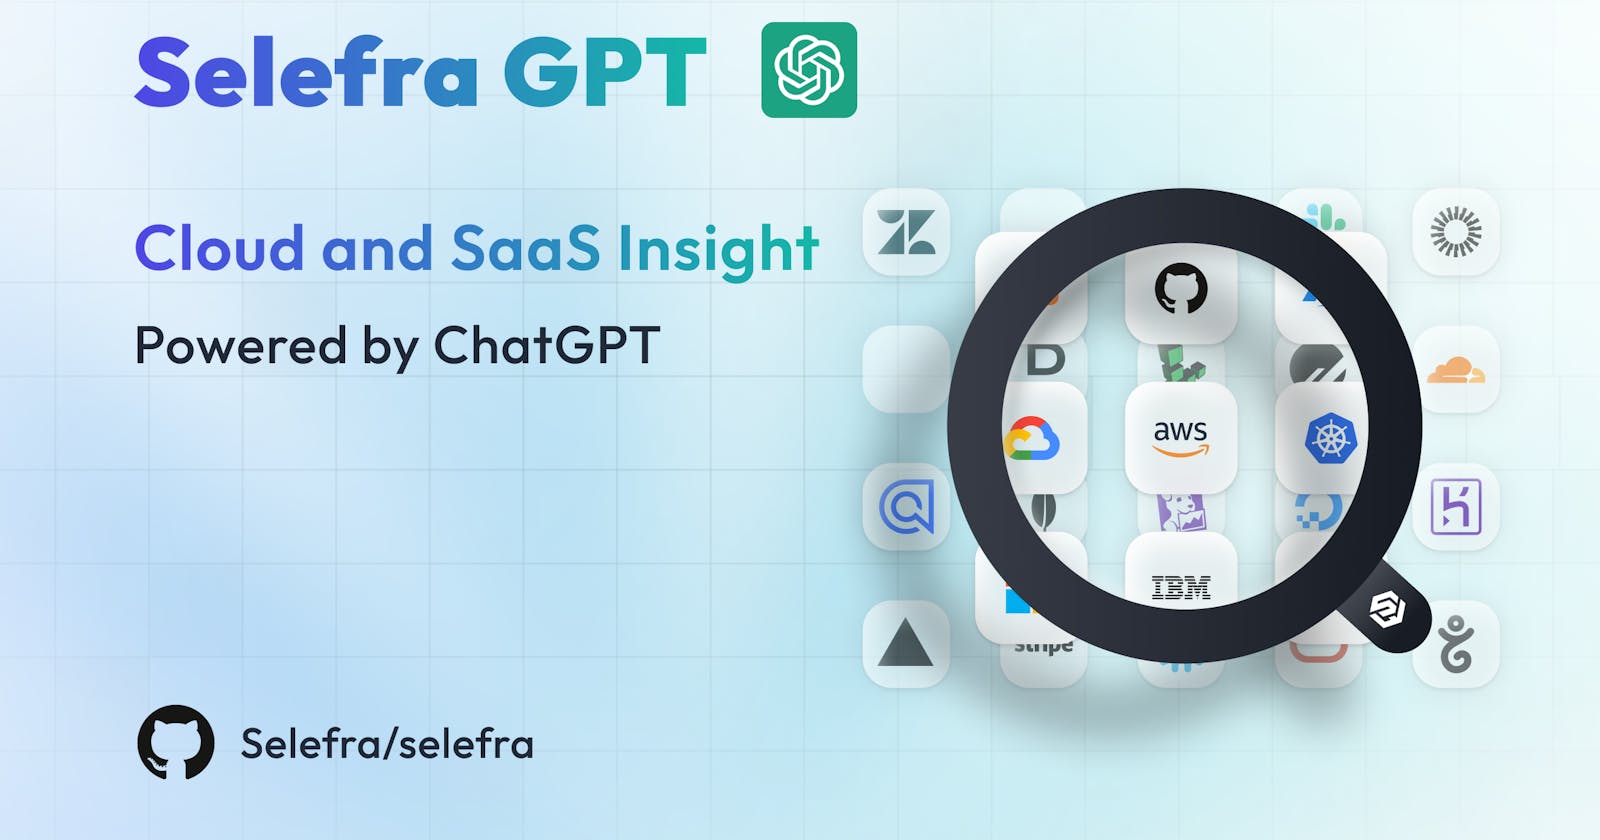 Introducing Selefra’s GPT Feature: Insight Multi-Cloud and SaaS by GPT